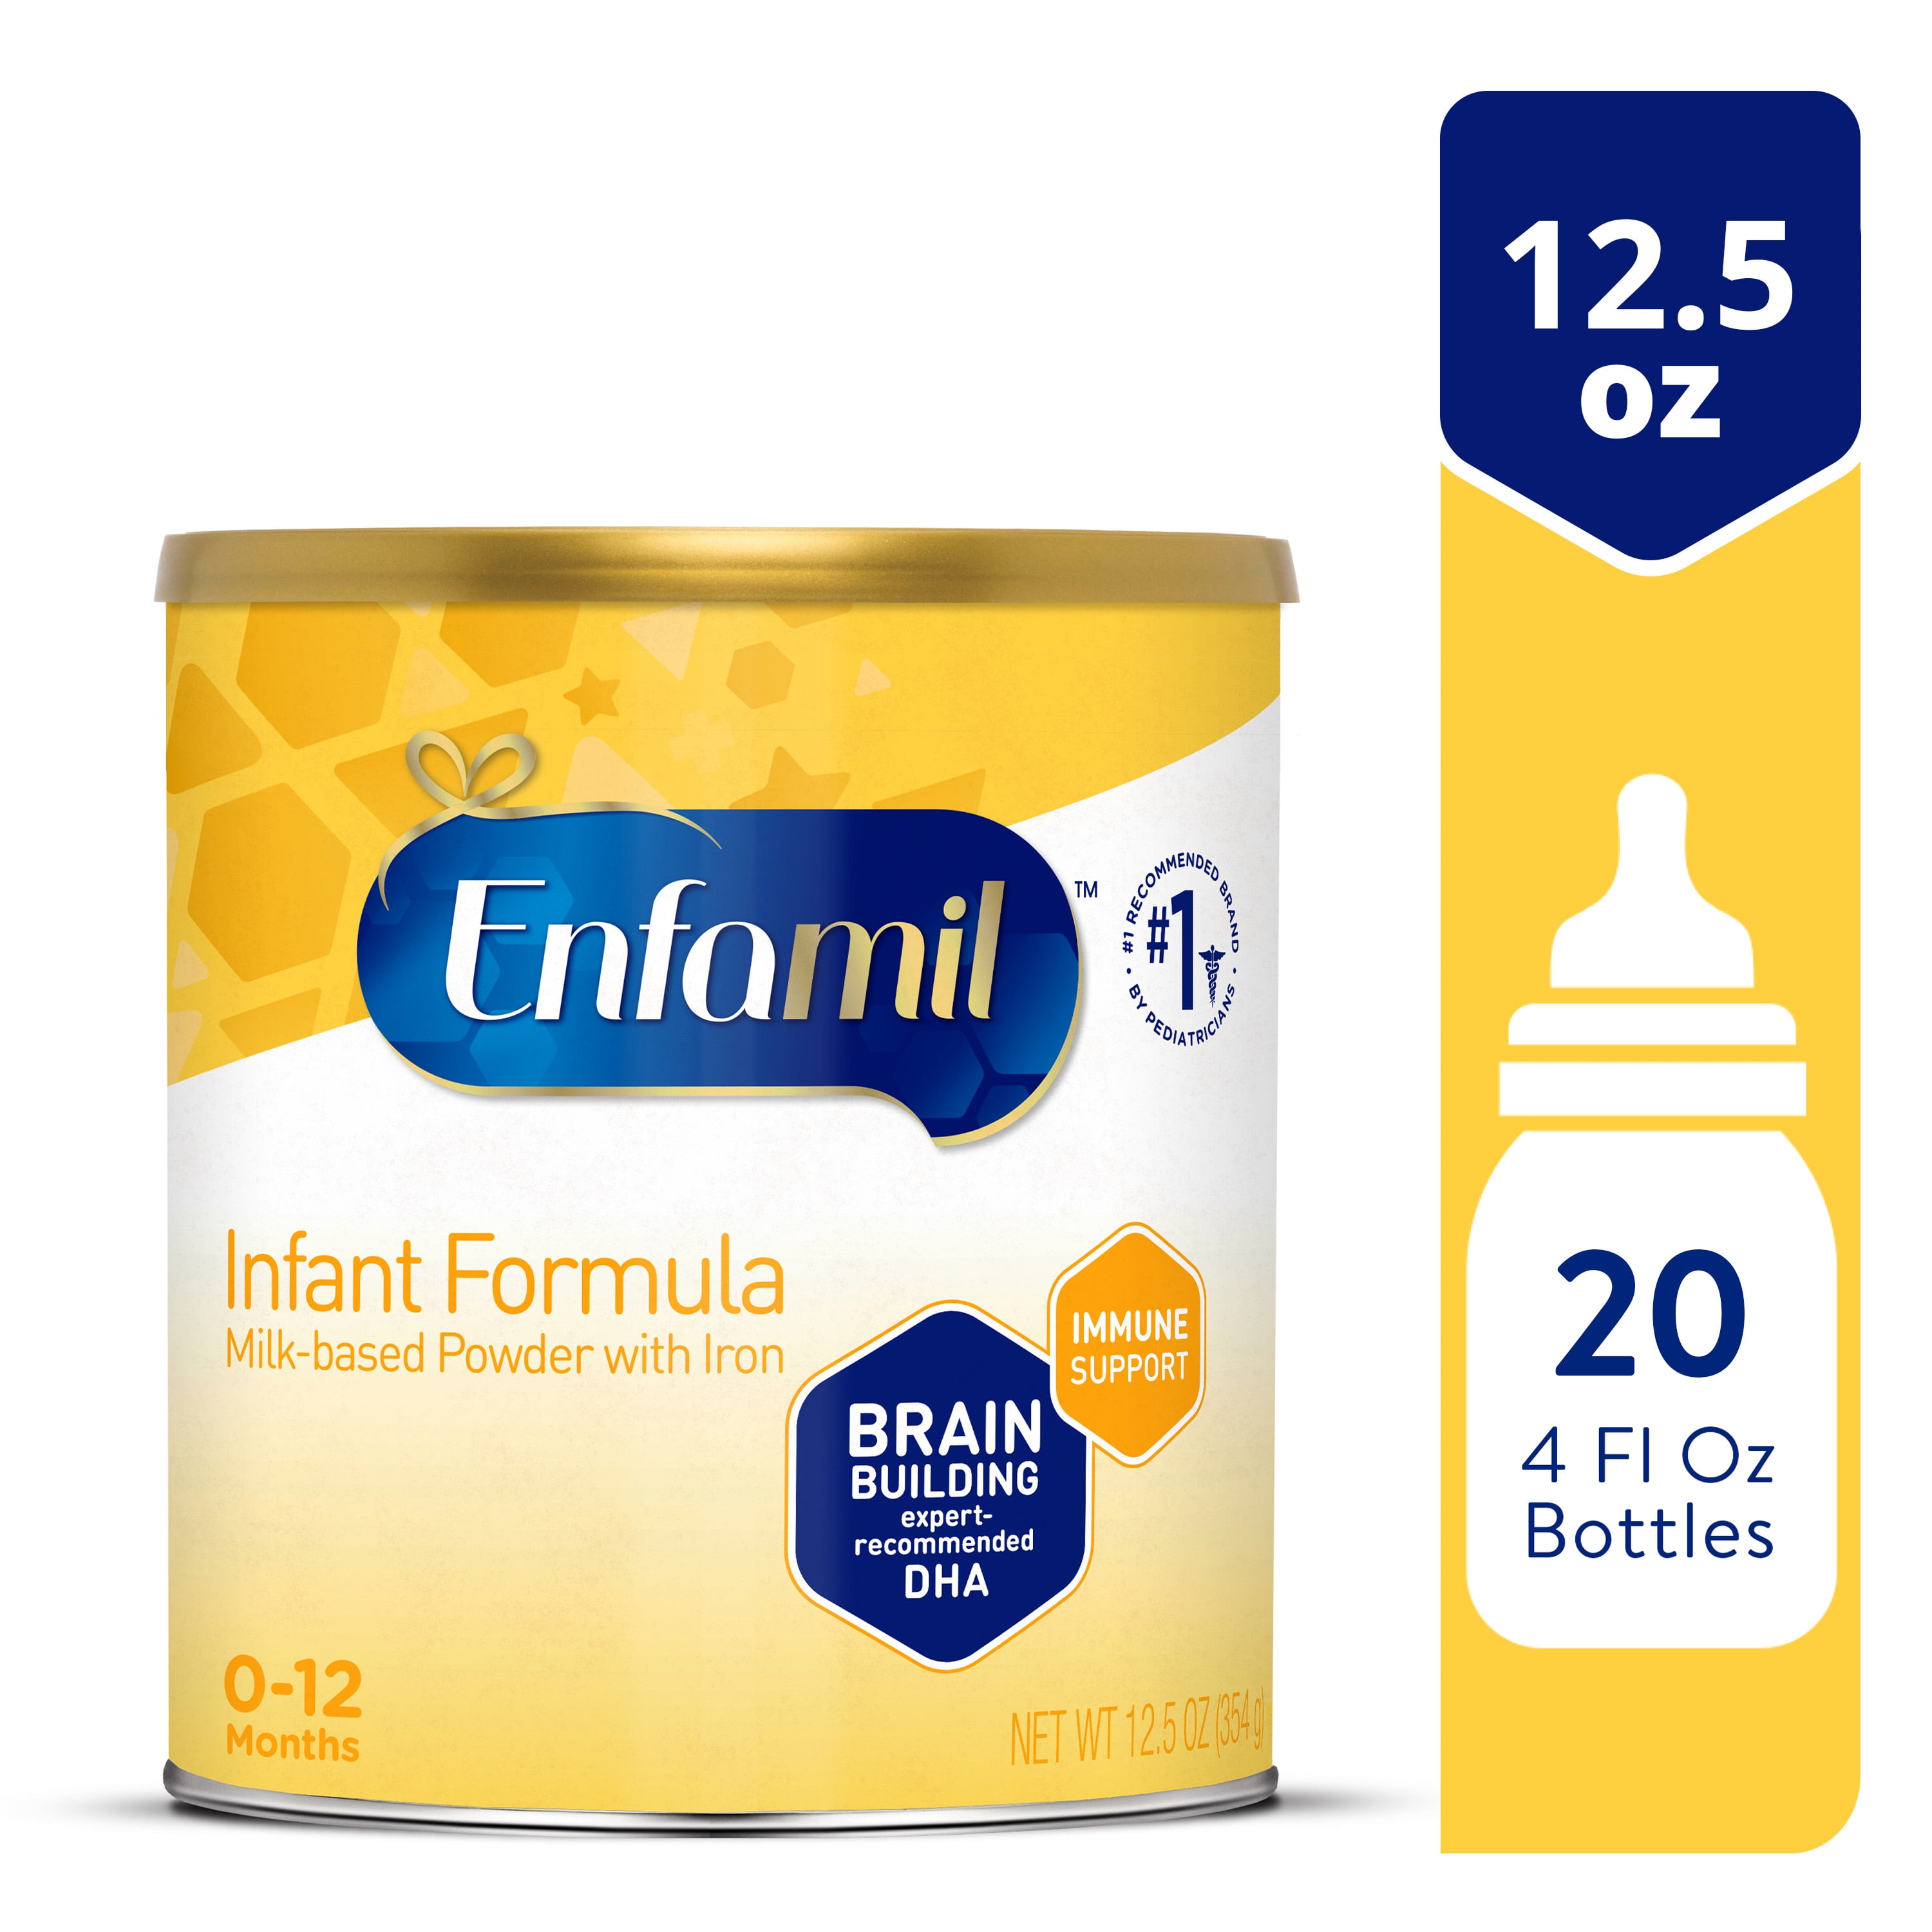 FREE Enfamil Wonder Box (Includes 2 FULL-SIZE Cans of Formula!)